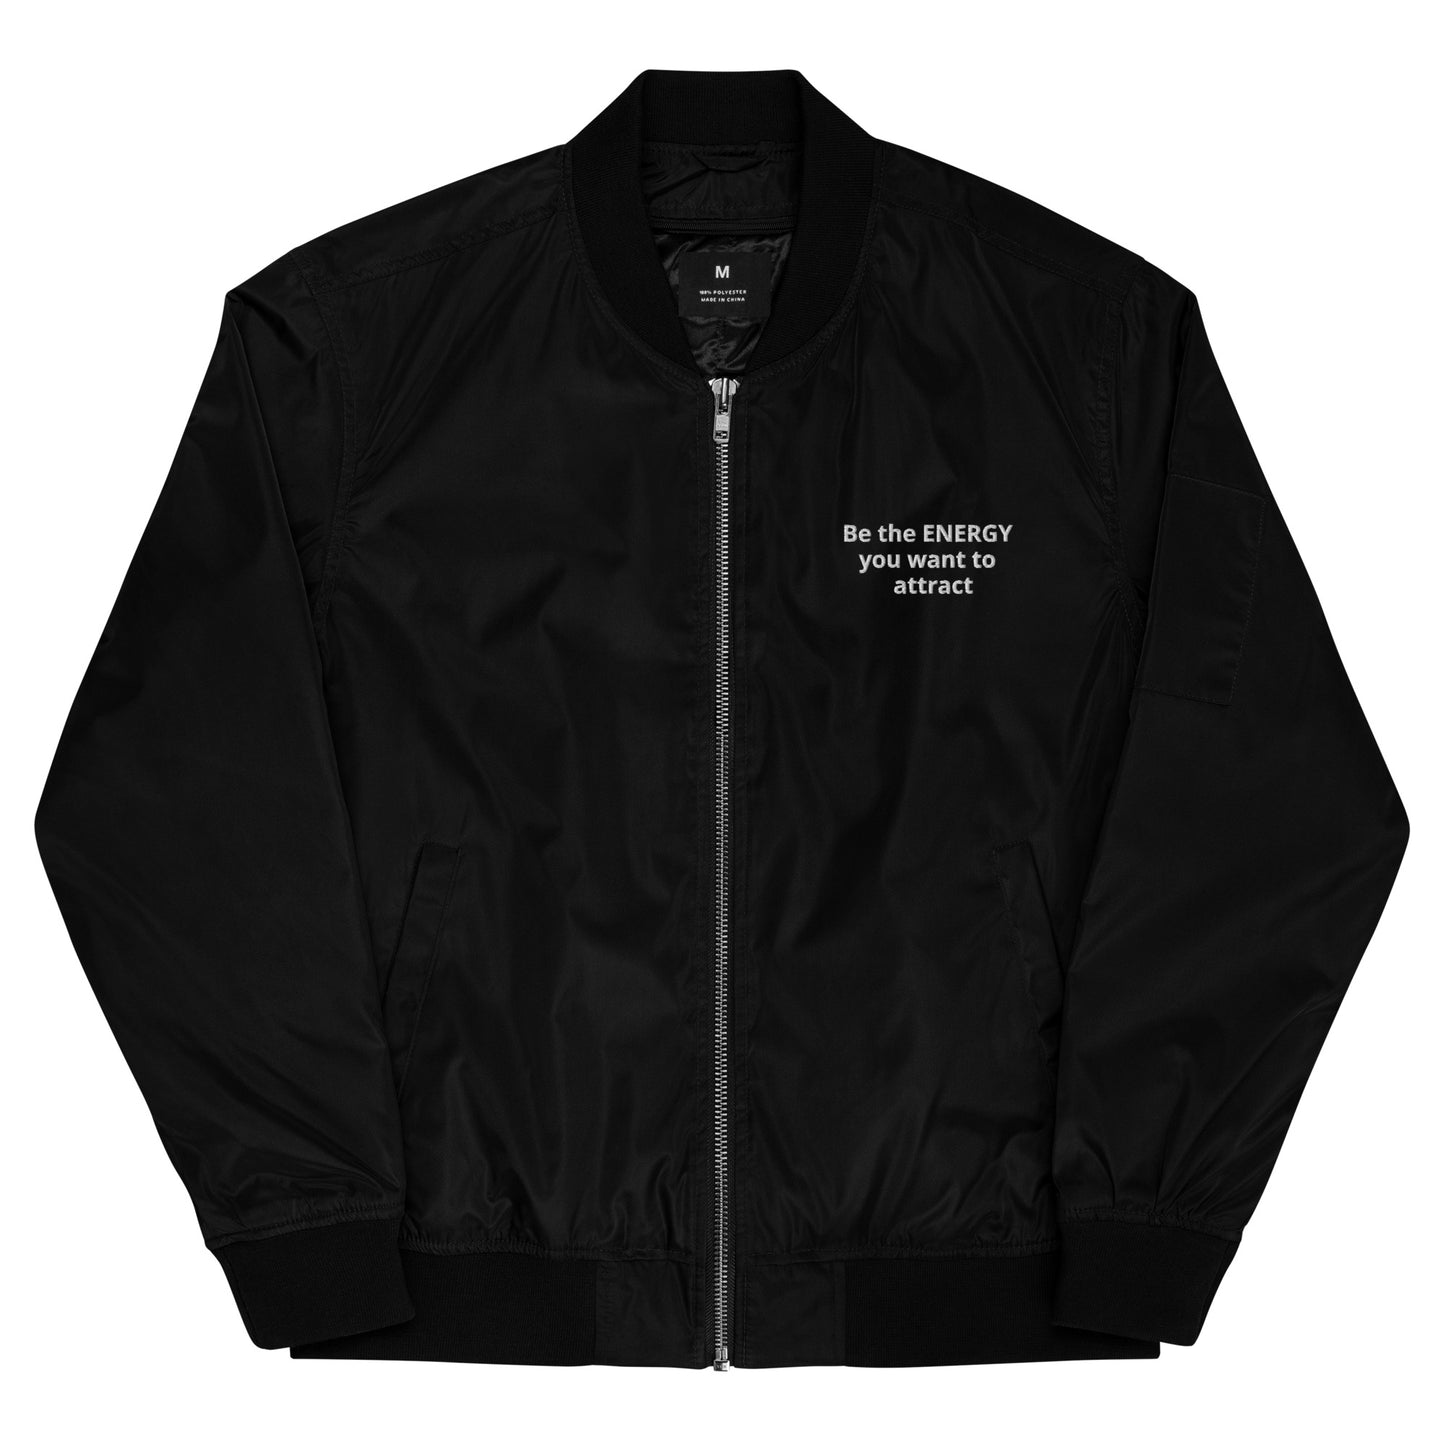 Be the Energy you want to Attract Premium recycled bomber jacket